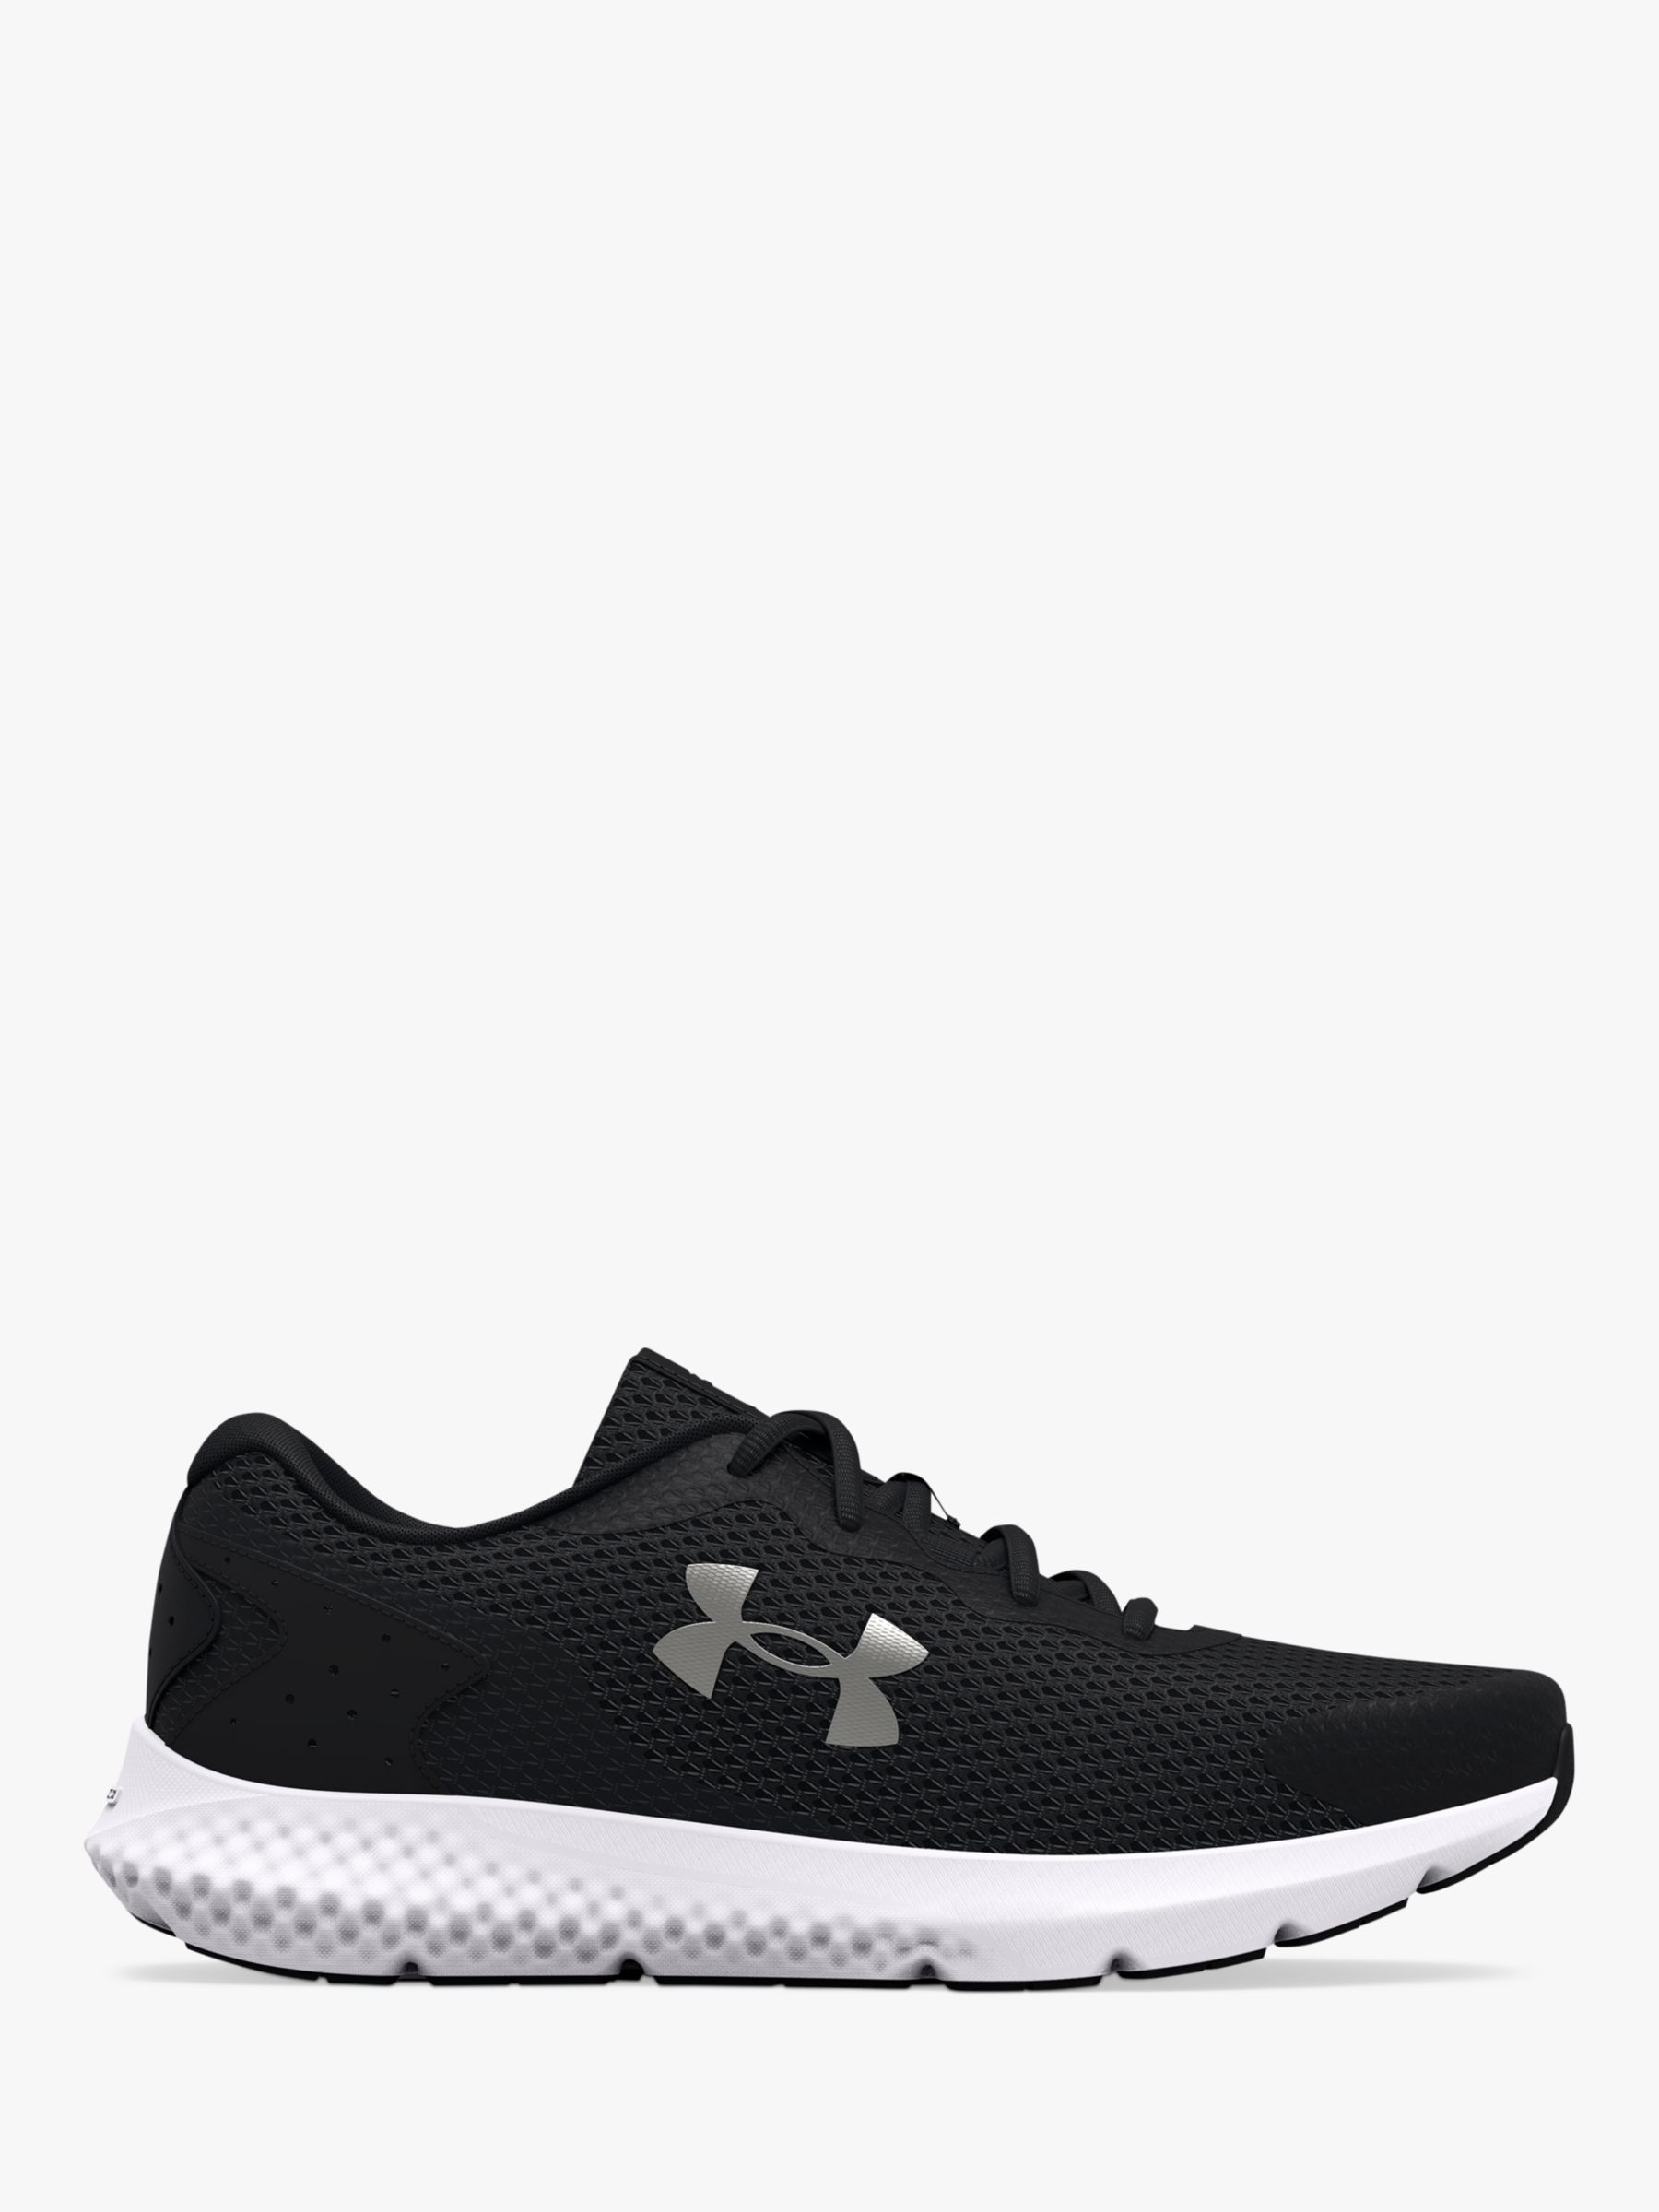 Under Armour Charged Rogue 3 Women's Running Shoes, Black/Mod Grey at ...